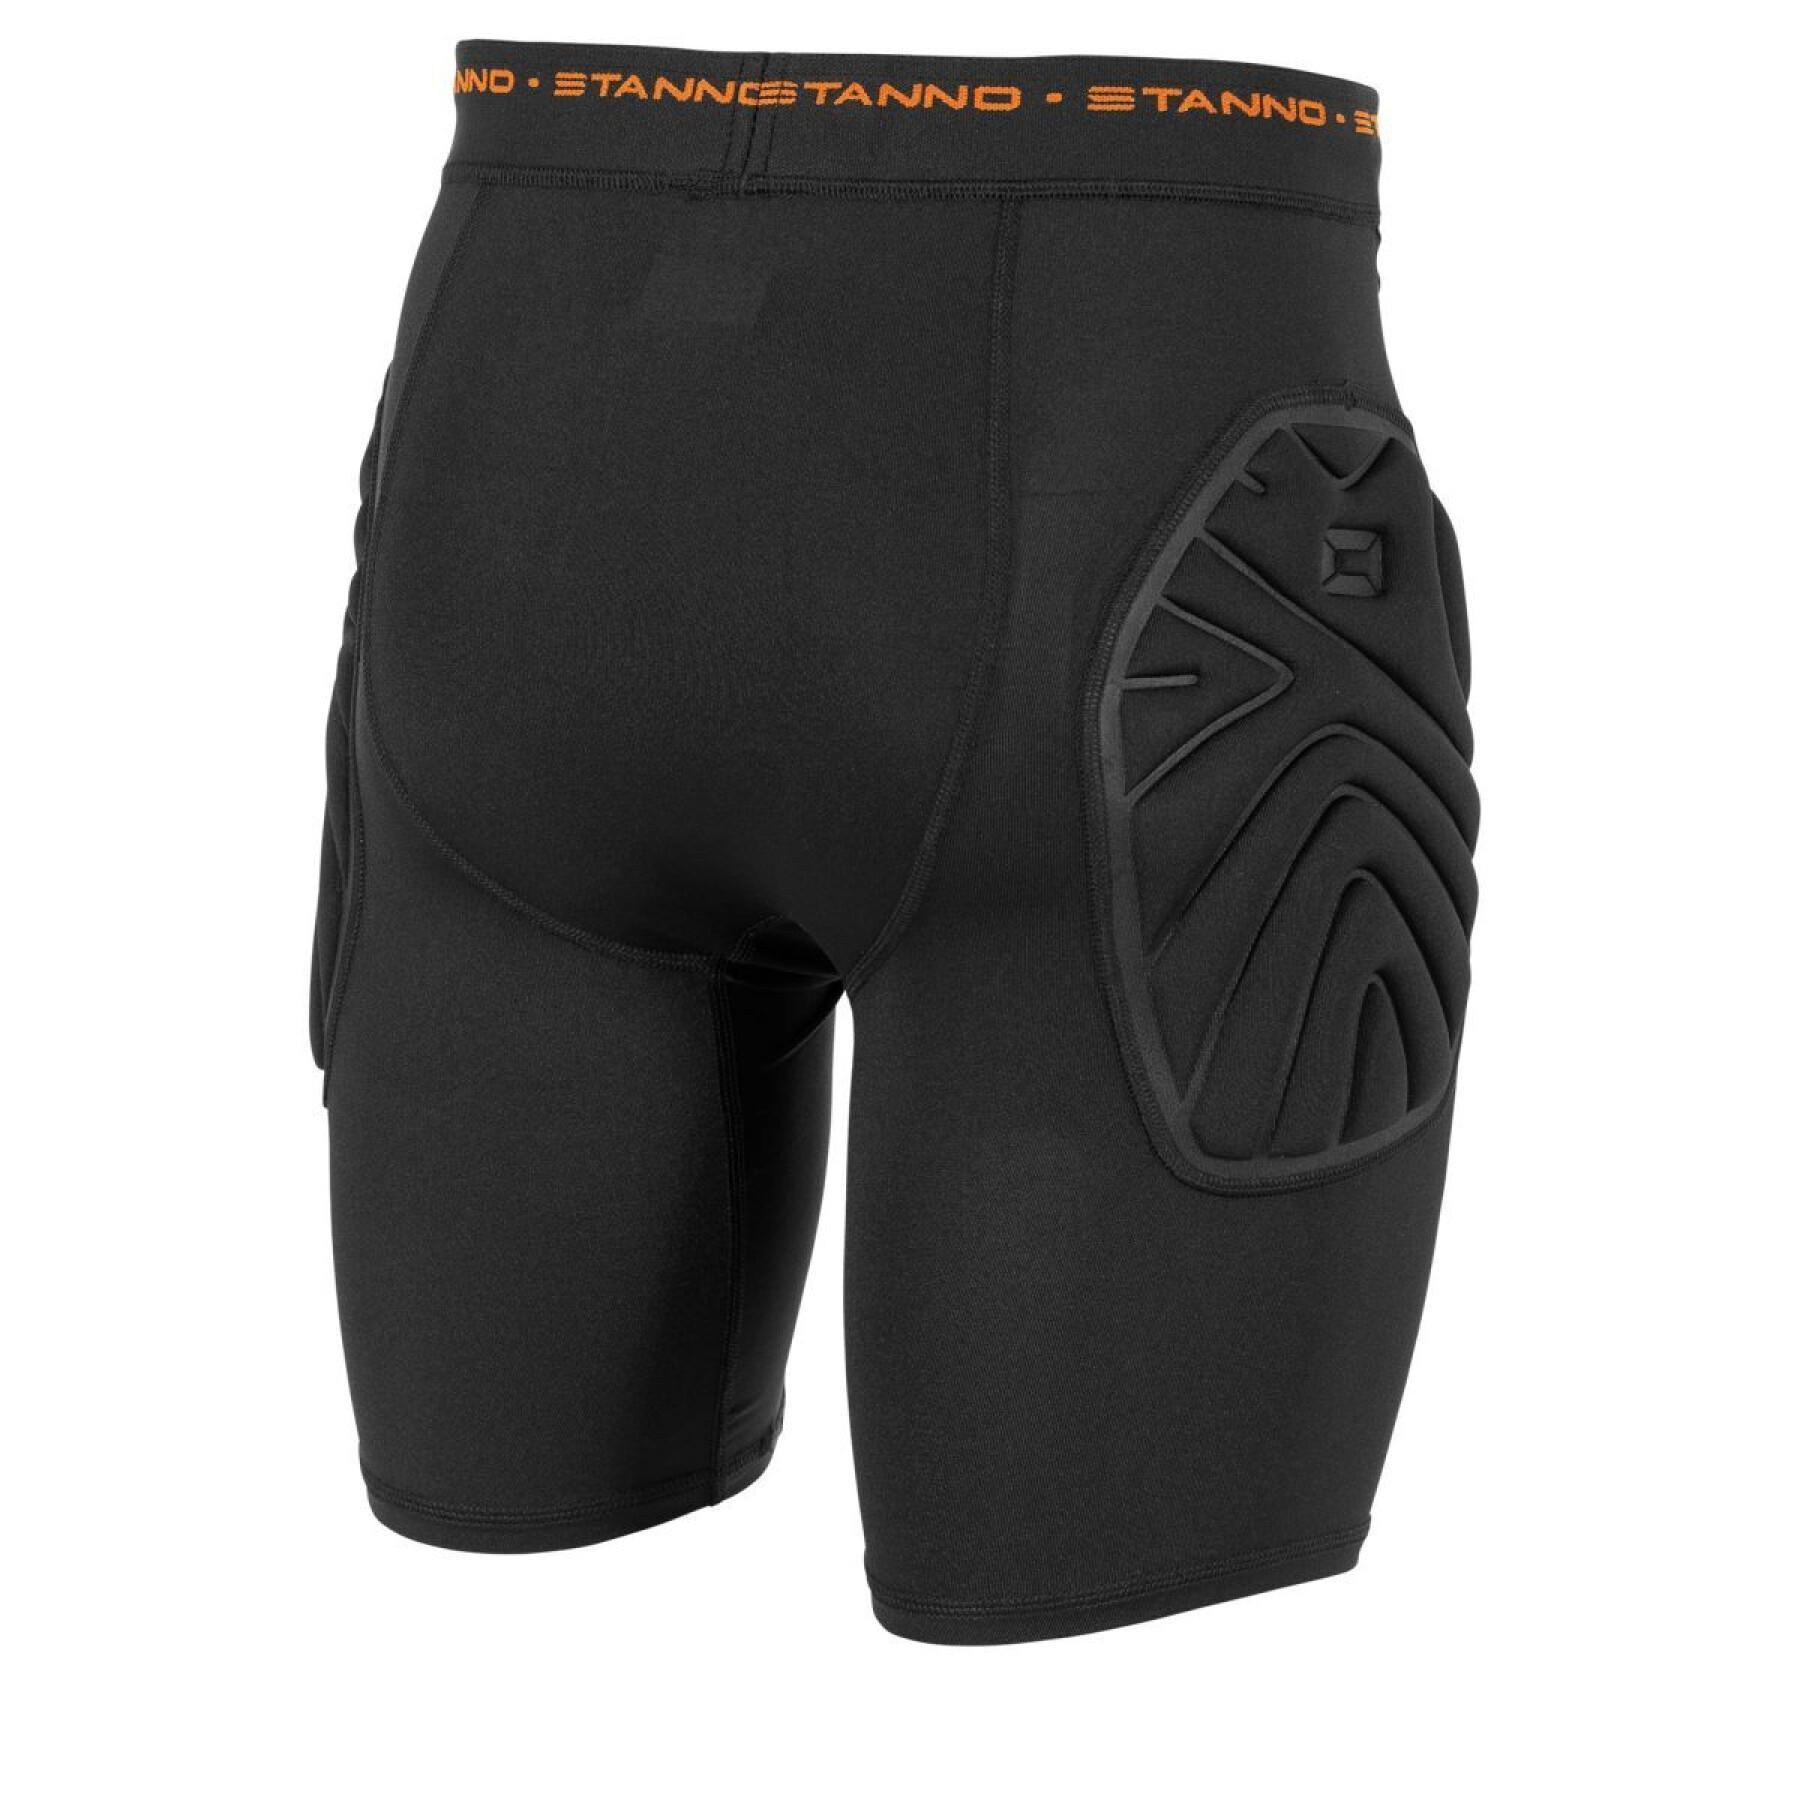 Child protection shorts Stanno Equip